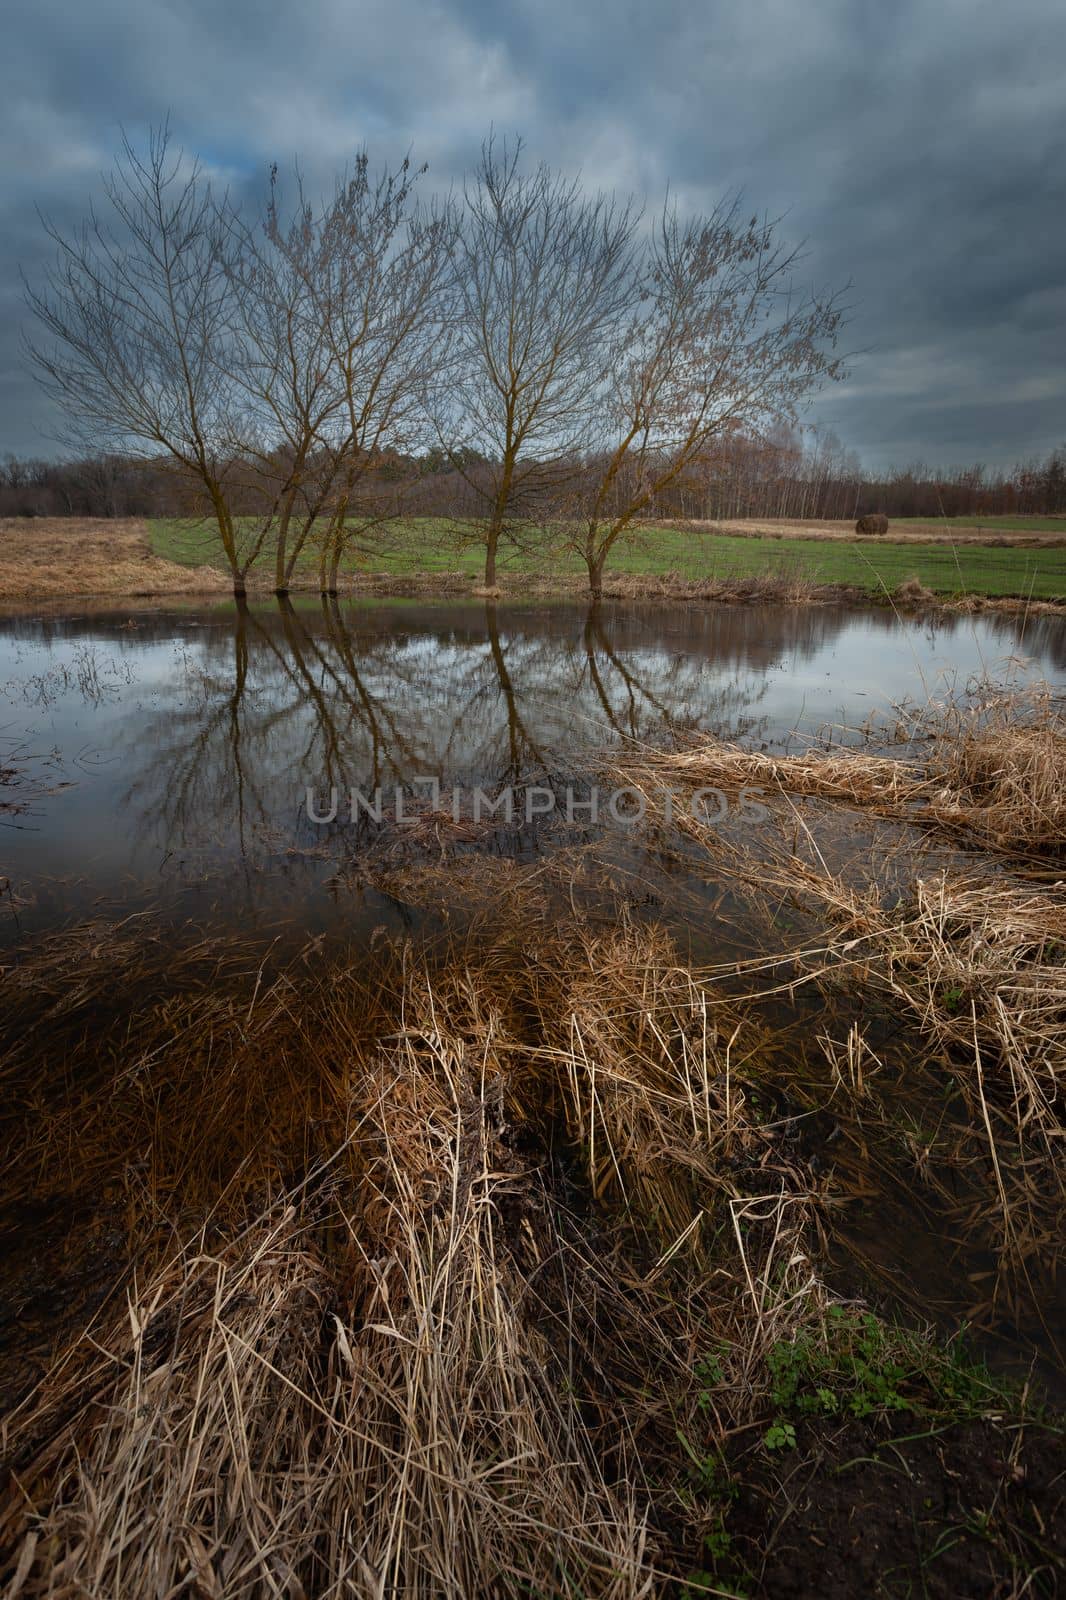 Reflection of trees in the water on a meadow on a cloudy day, Zarzecze, Poland